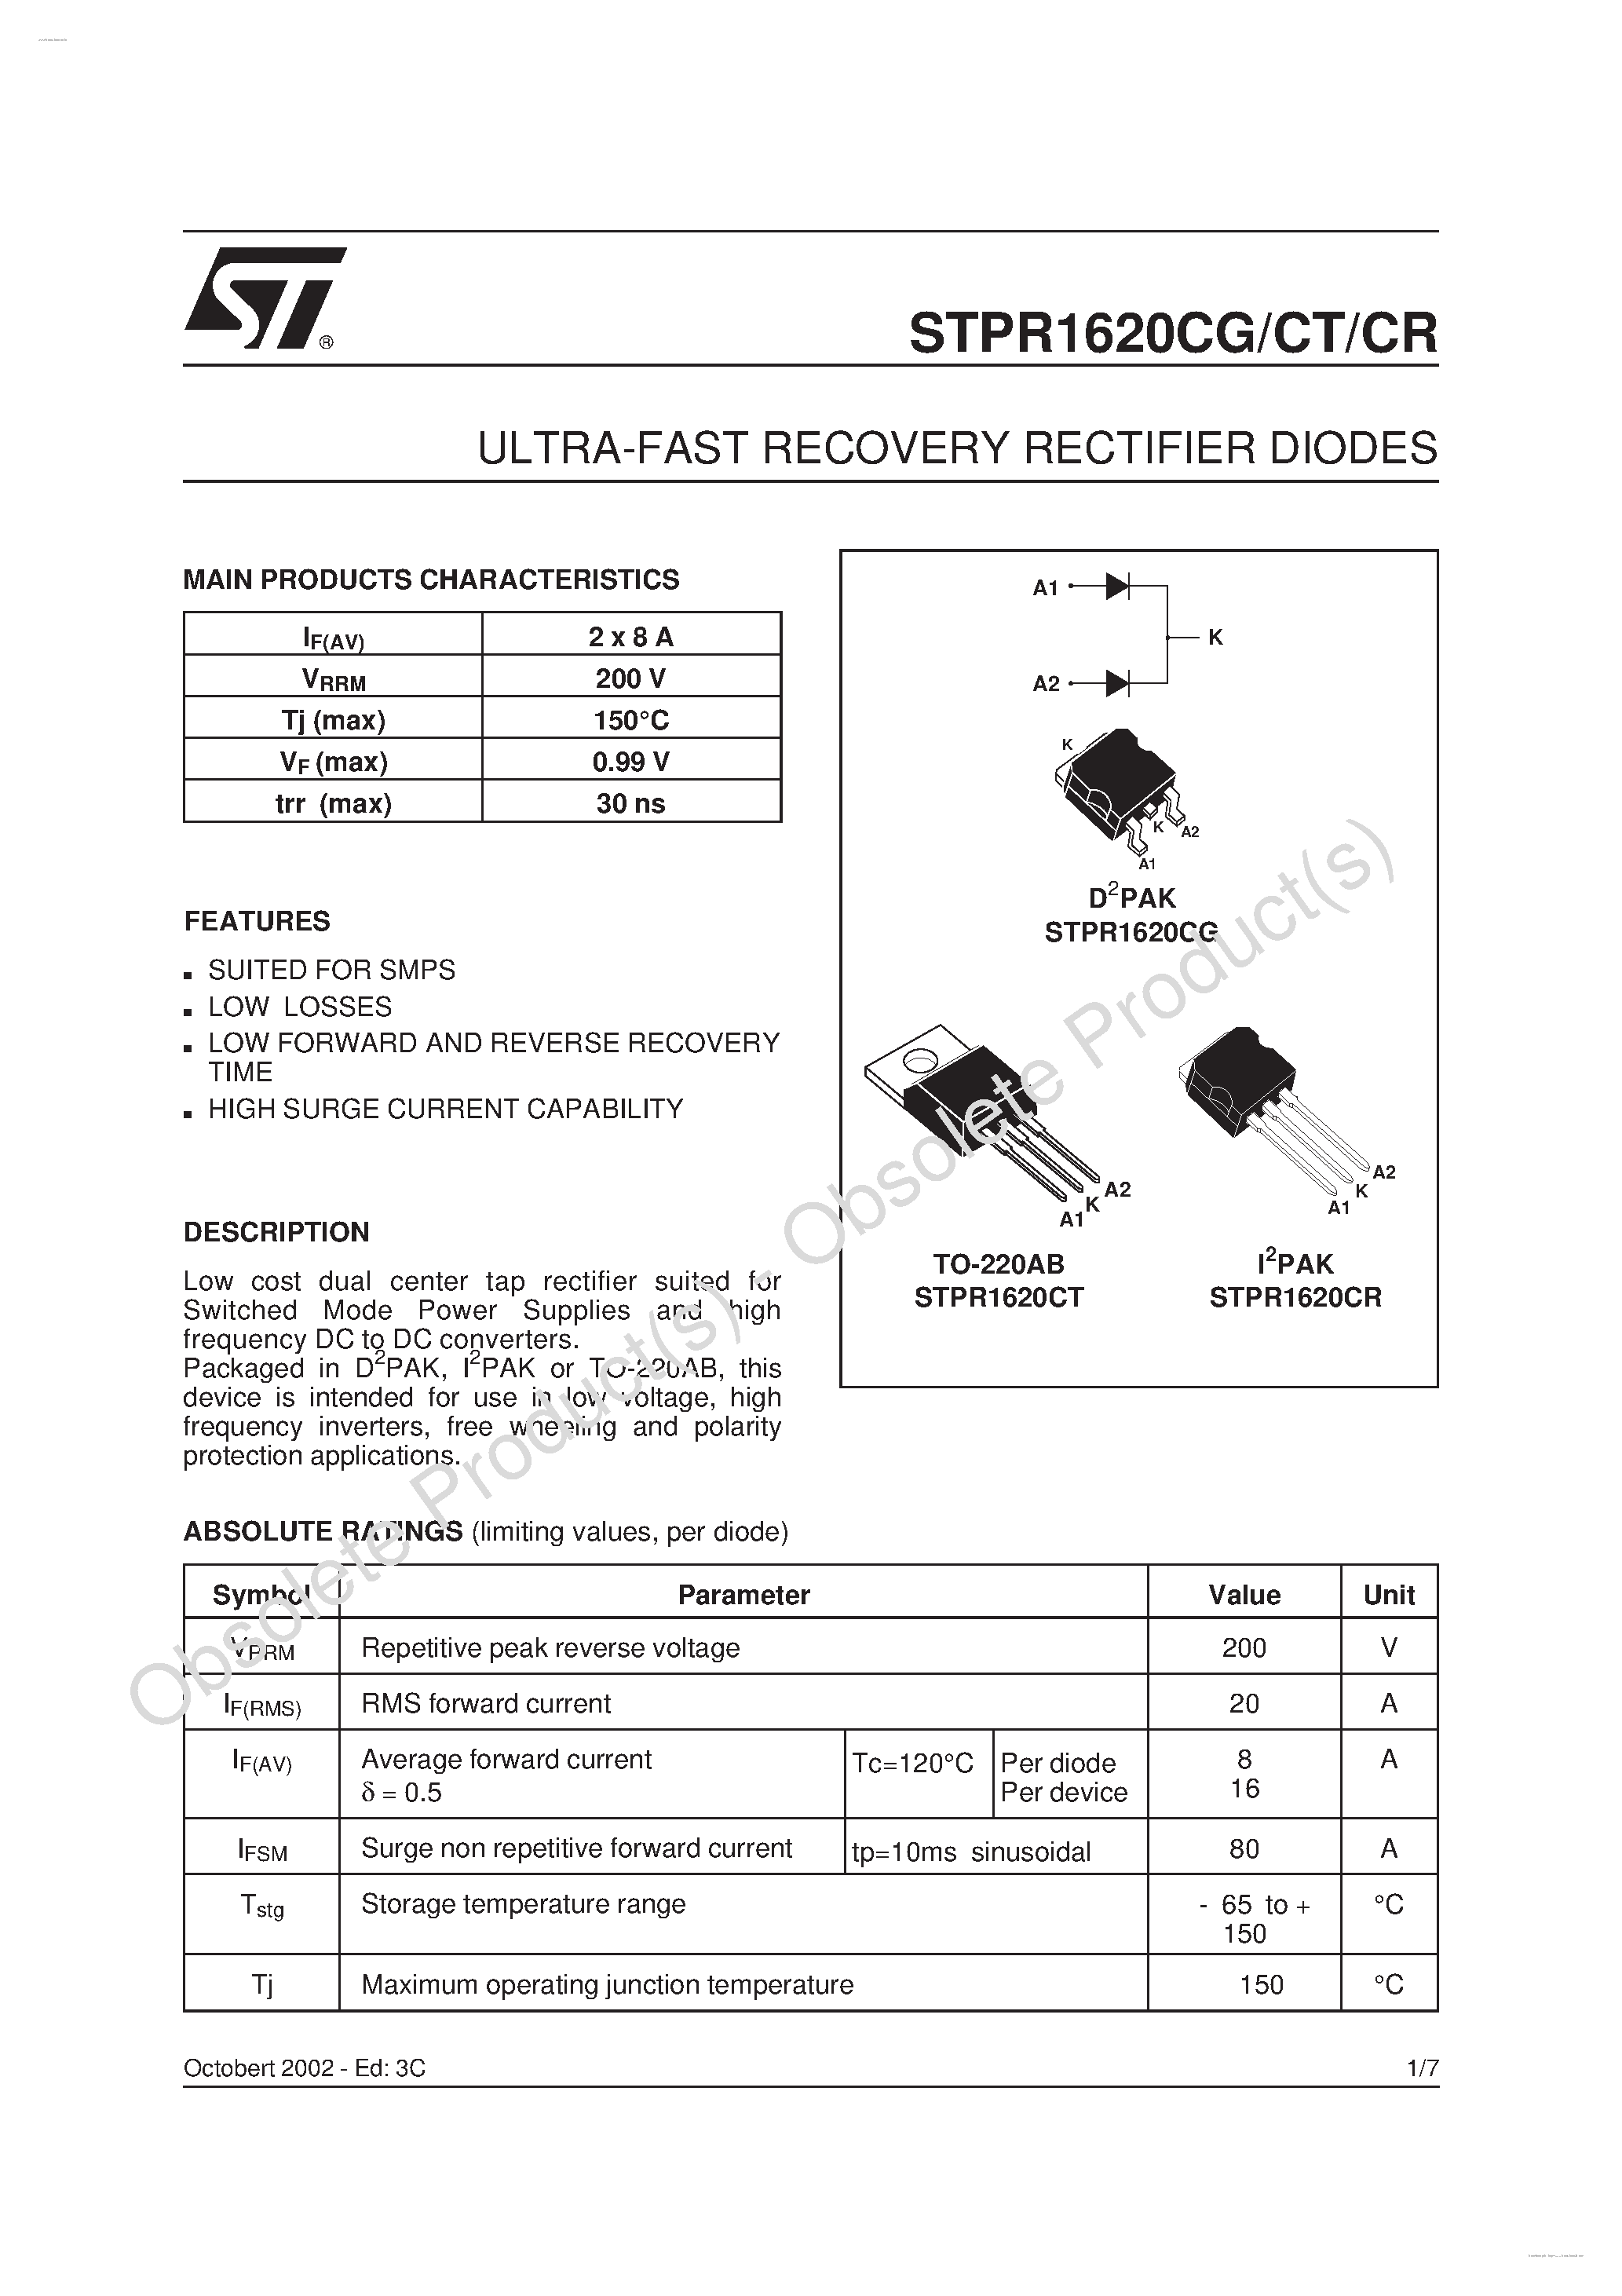 Даташит STPR1620CG - ULTRA-FAST RECOVERY RECTIFIER DIODES страница 1